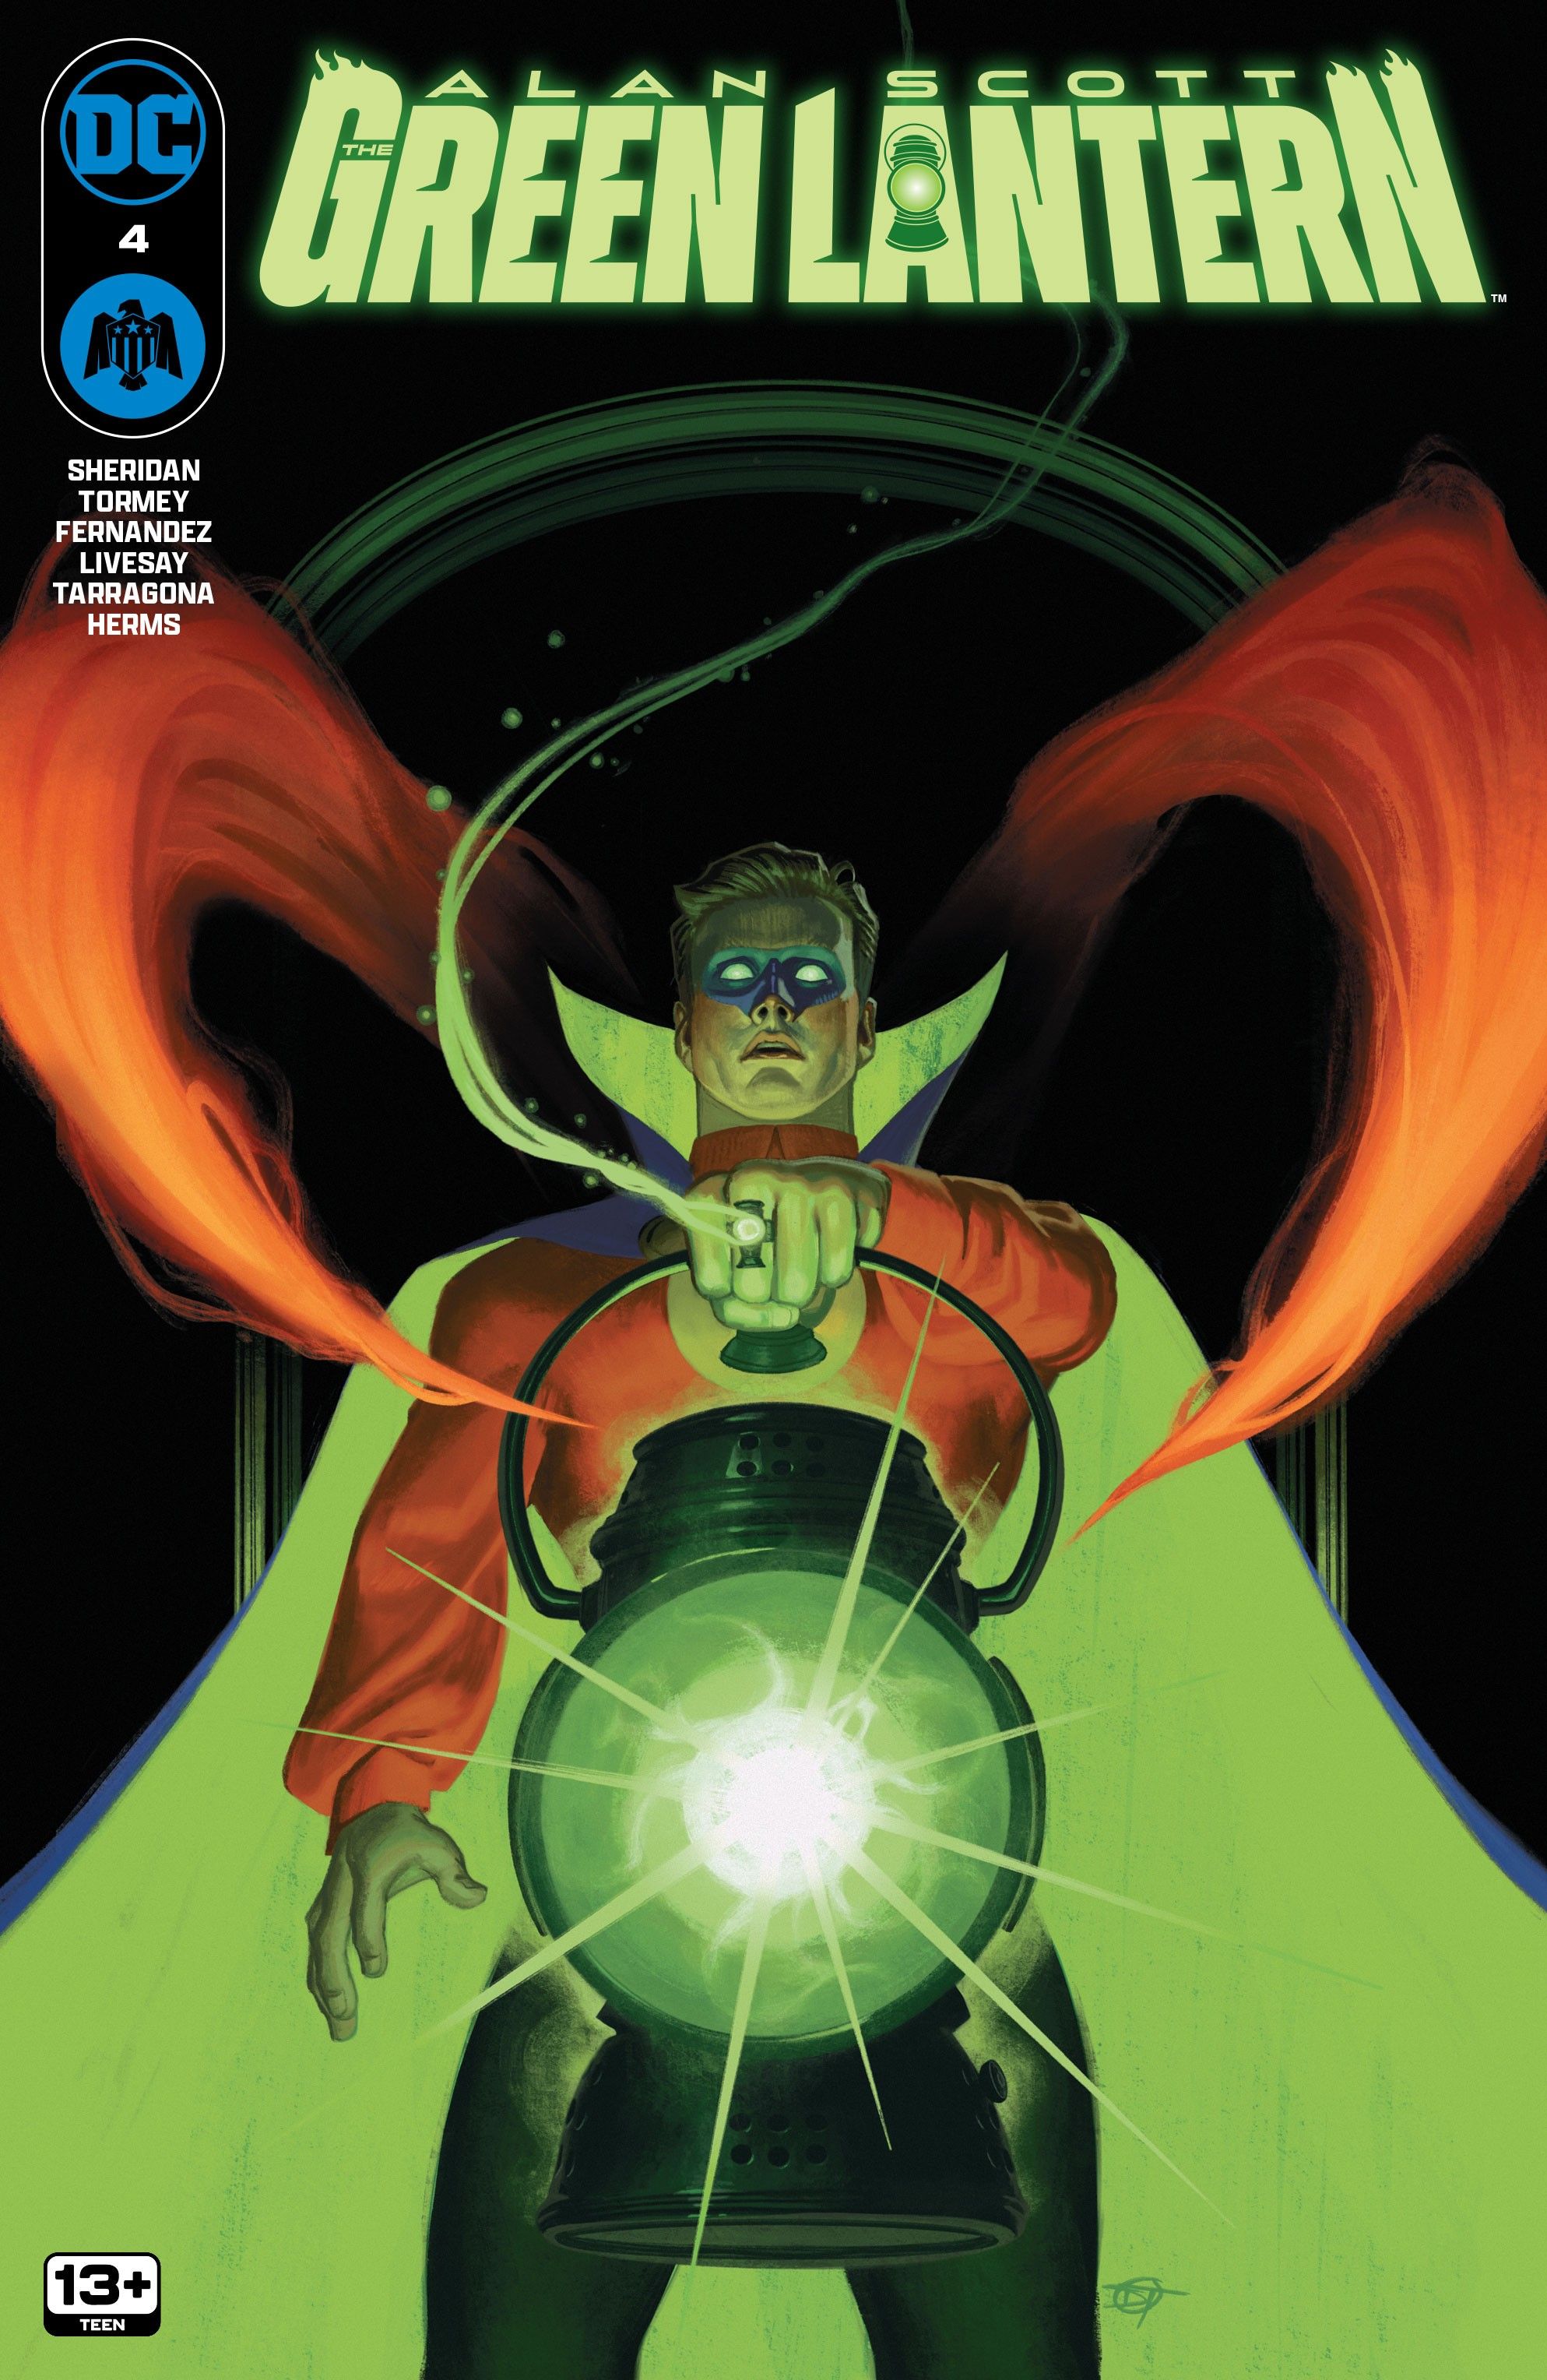 Image of Alan Scott holding the Green Lantern while red mists circle around him.